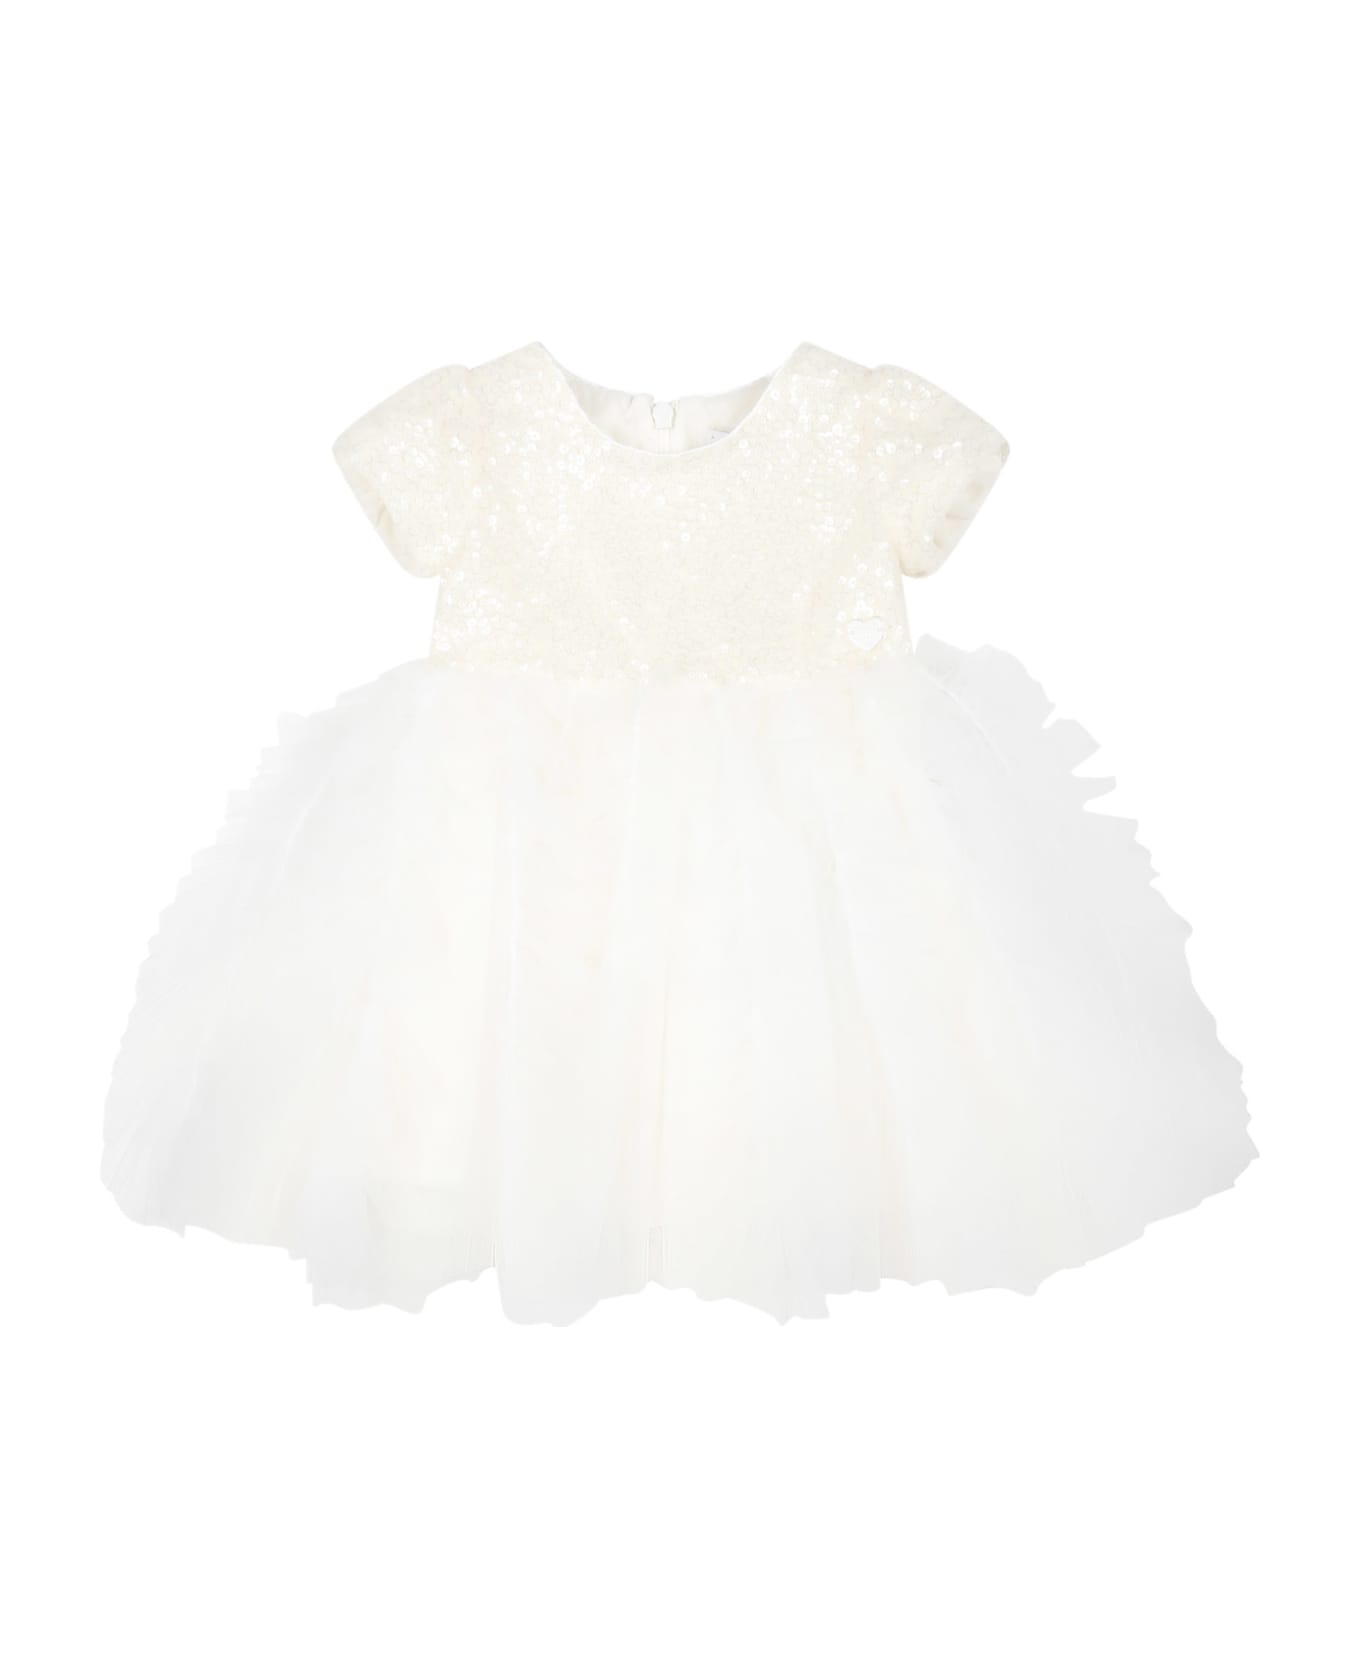 Monnalisa White Dress For Baby Girl With Sequins - White ウェア